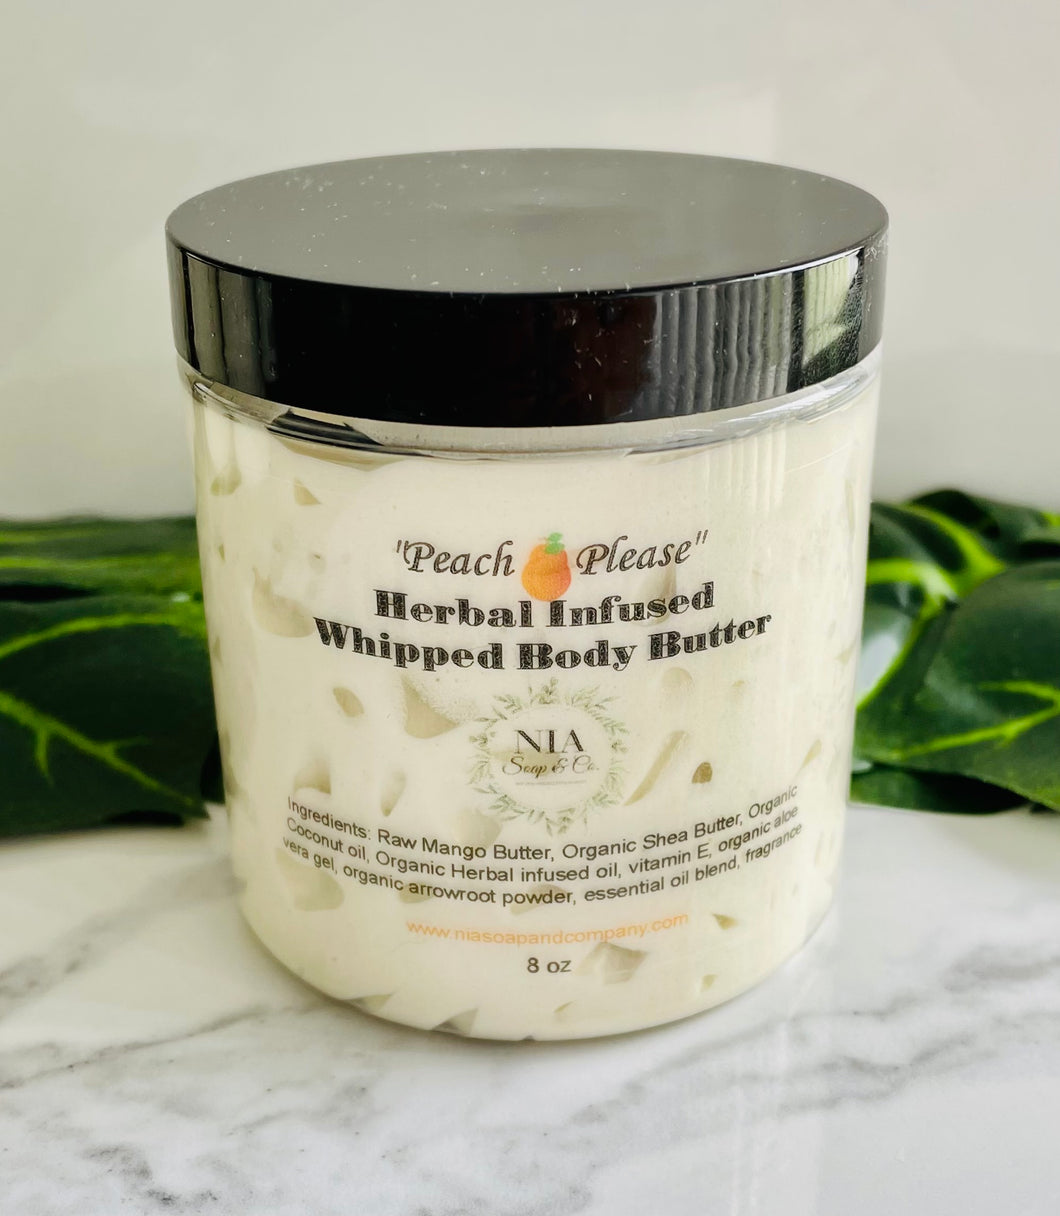 “Peach Please” Herbal Infused Whipped Body Butter